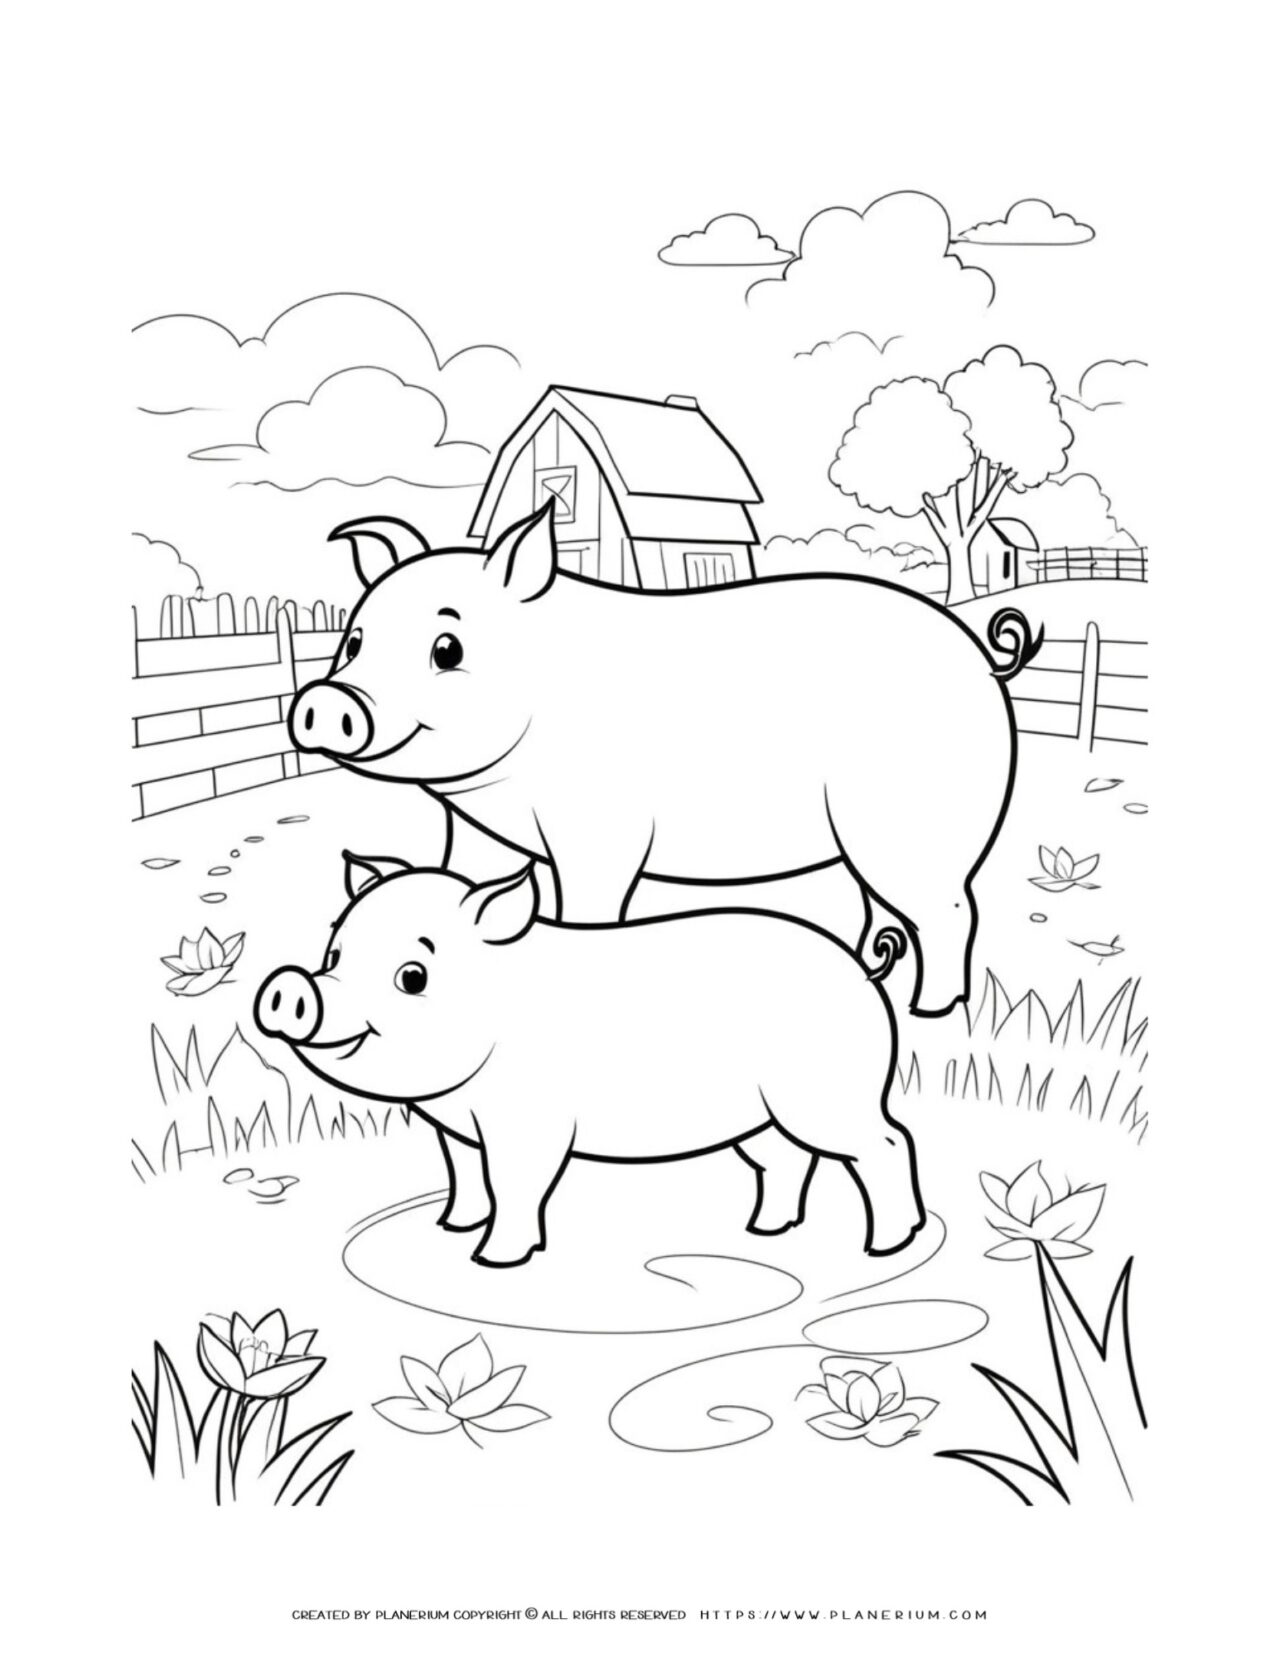 two-pigs-family-side-view-in-the-farm-coloring-page-for-kids